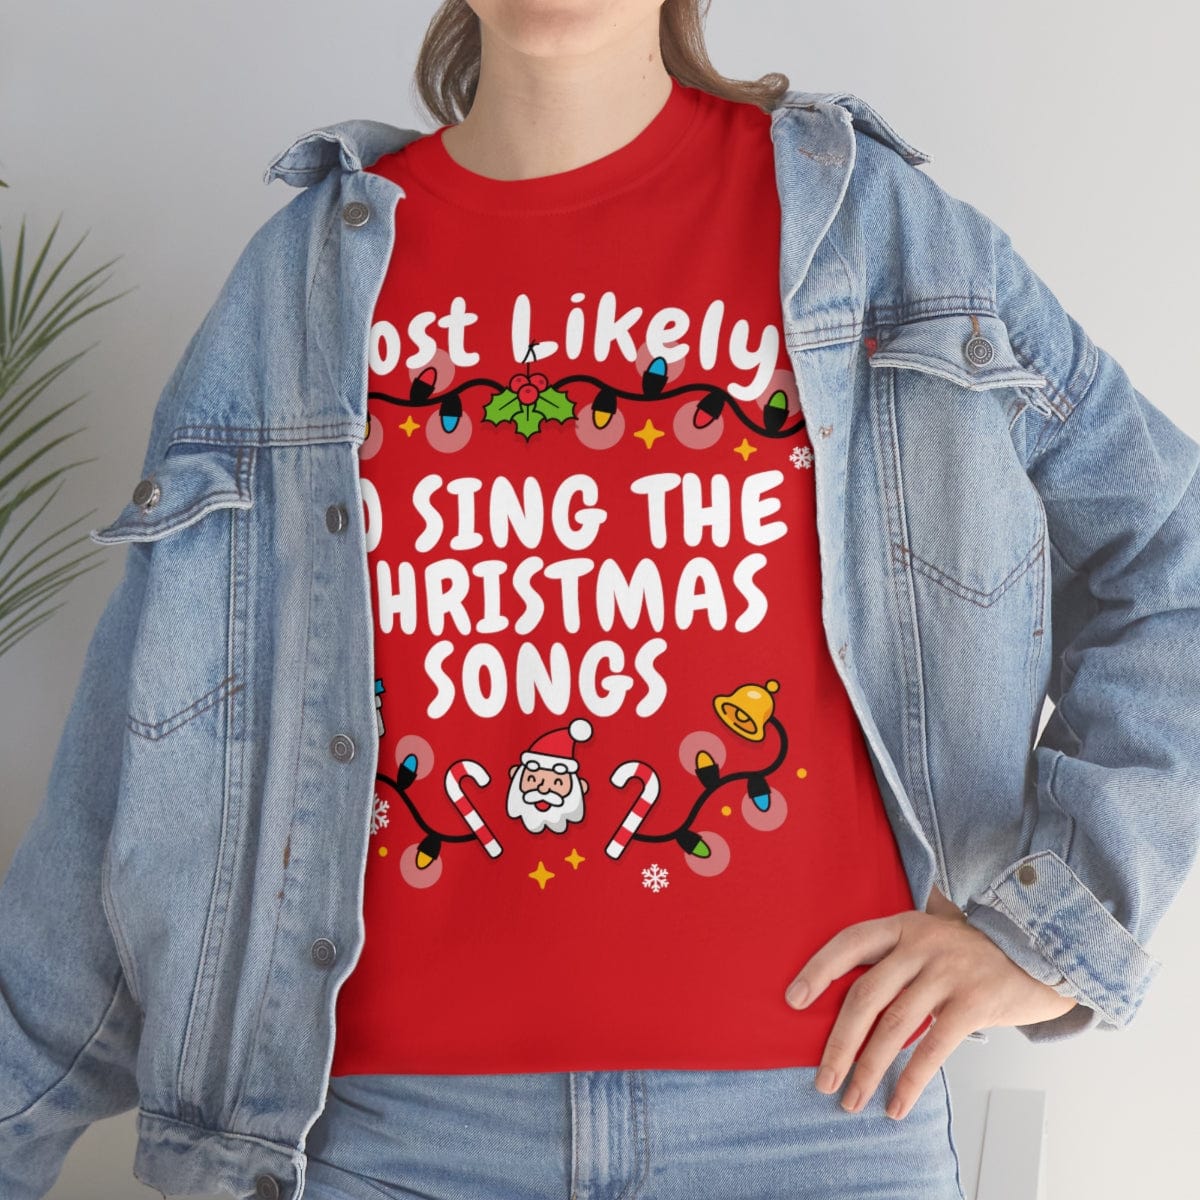 TO SING THE CHRISTMAS SONGS